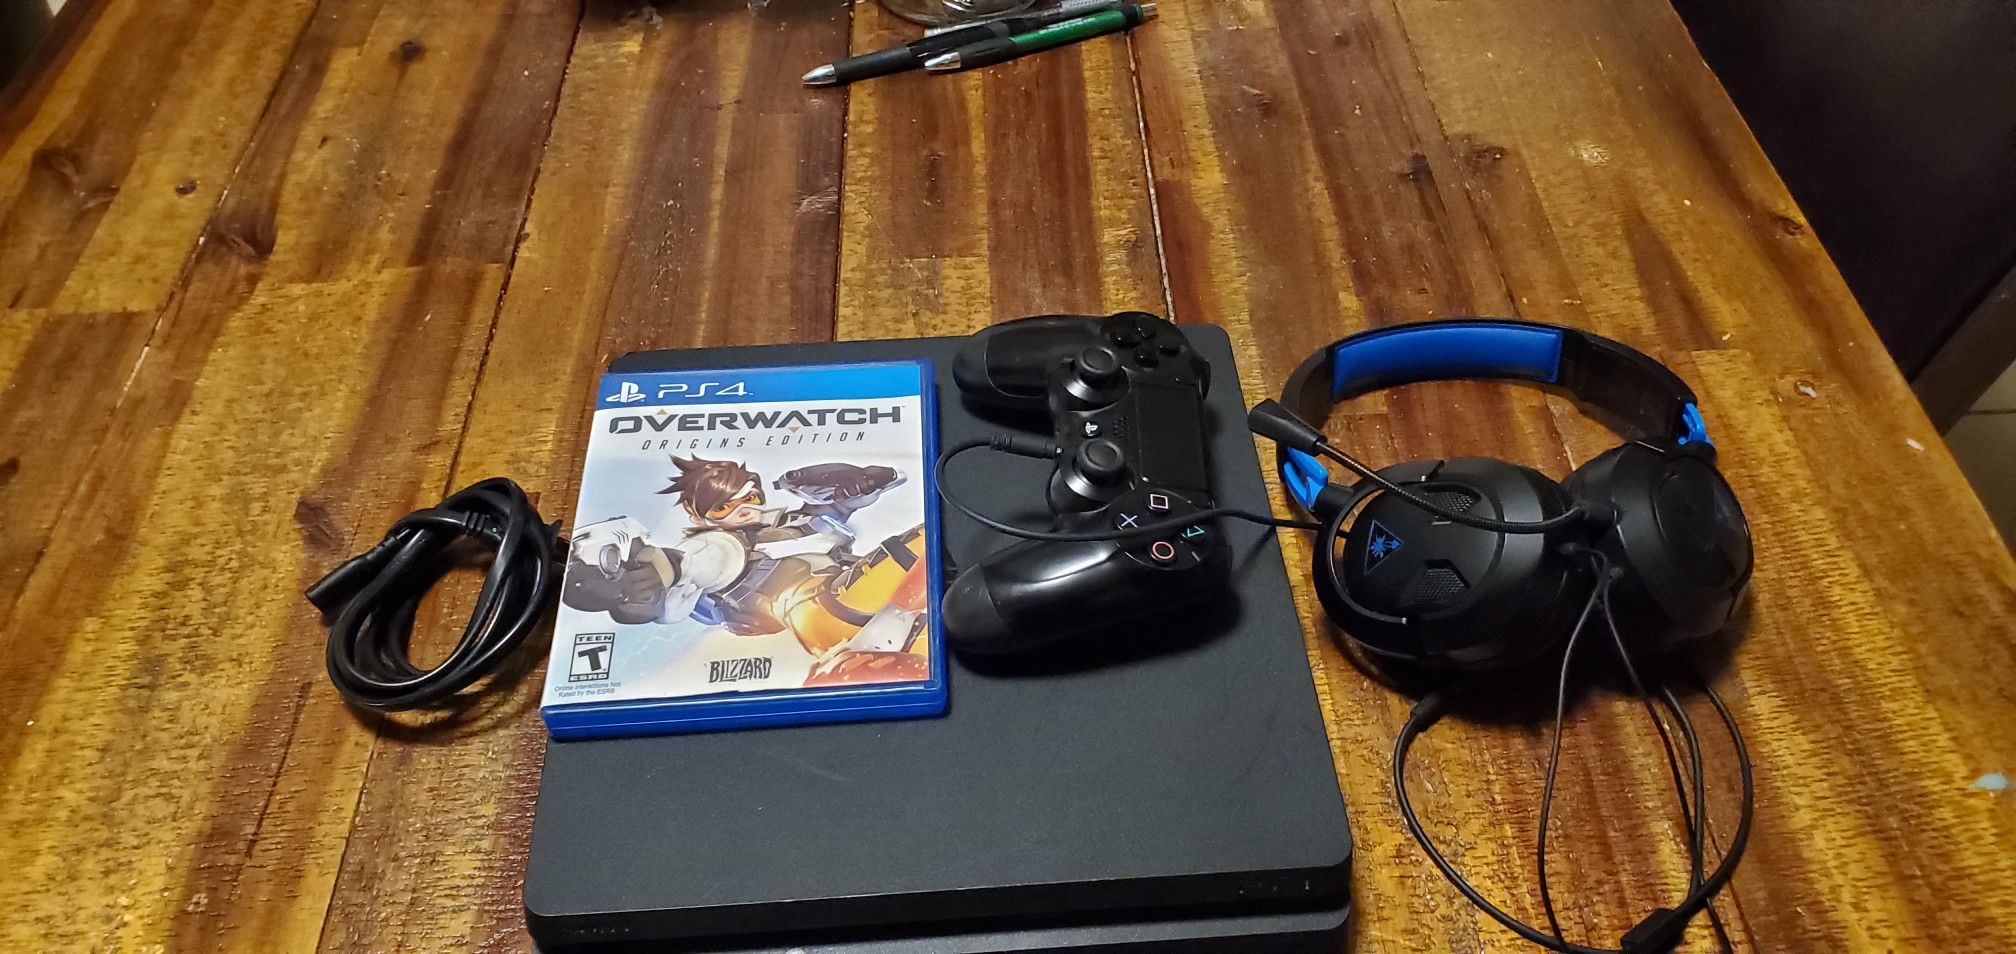 Ps4 slim with headphones and game